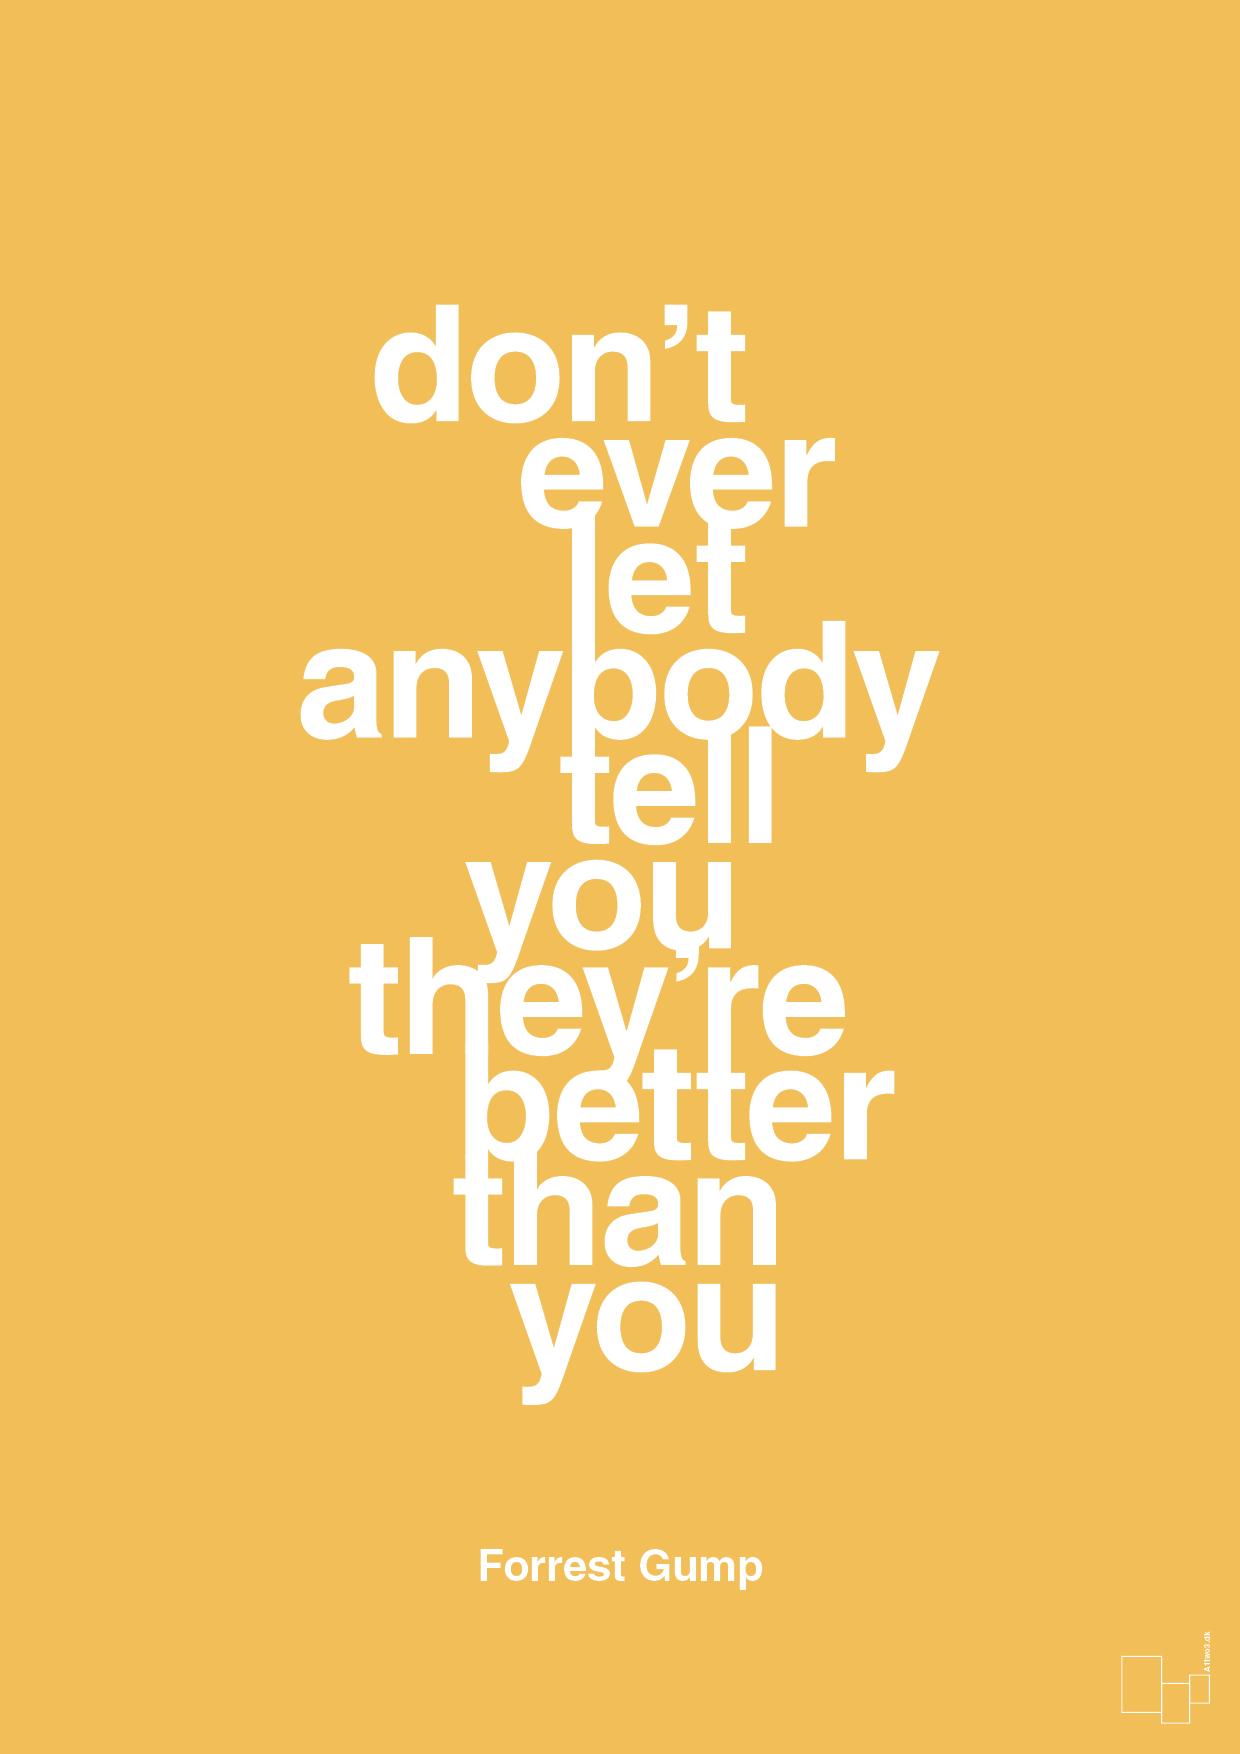 don’t ever let anybody tell you they’re better than you - Plakat med Citater i Honeycomb